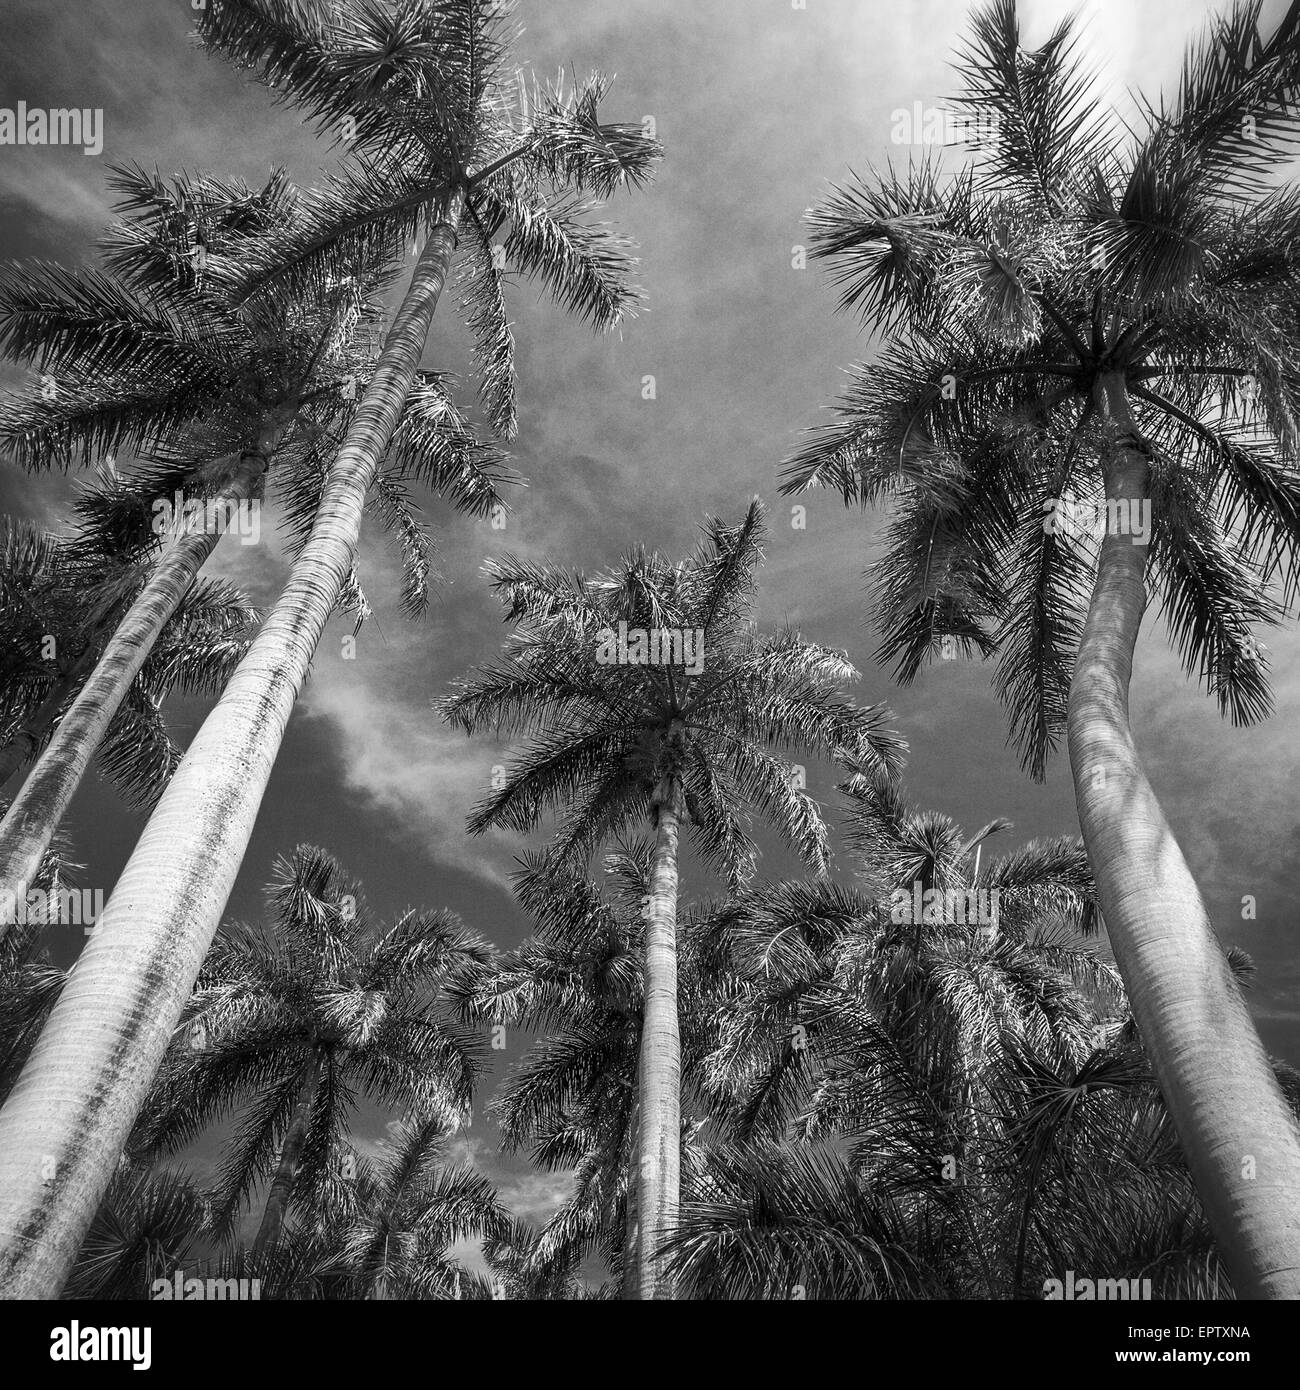 Looking up at palm trees in Nicaragua Stock Photo